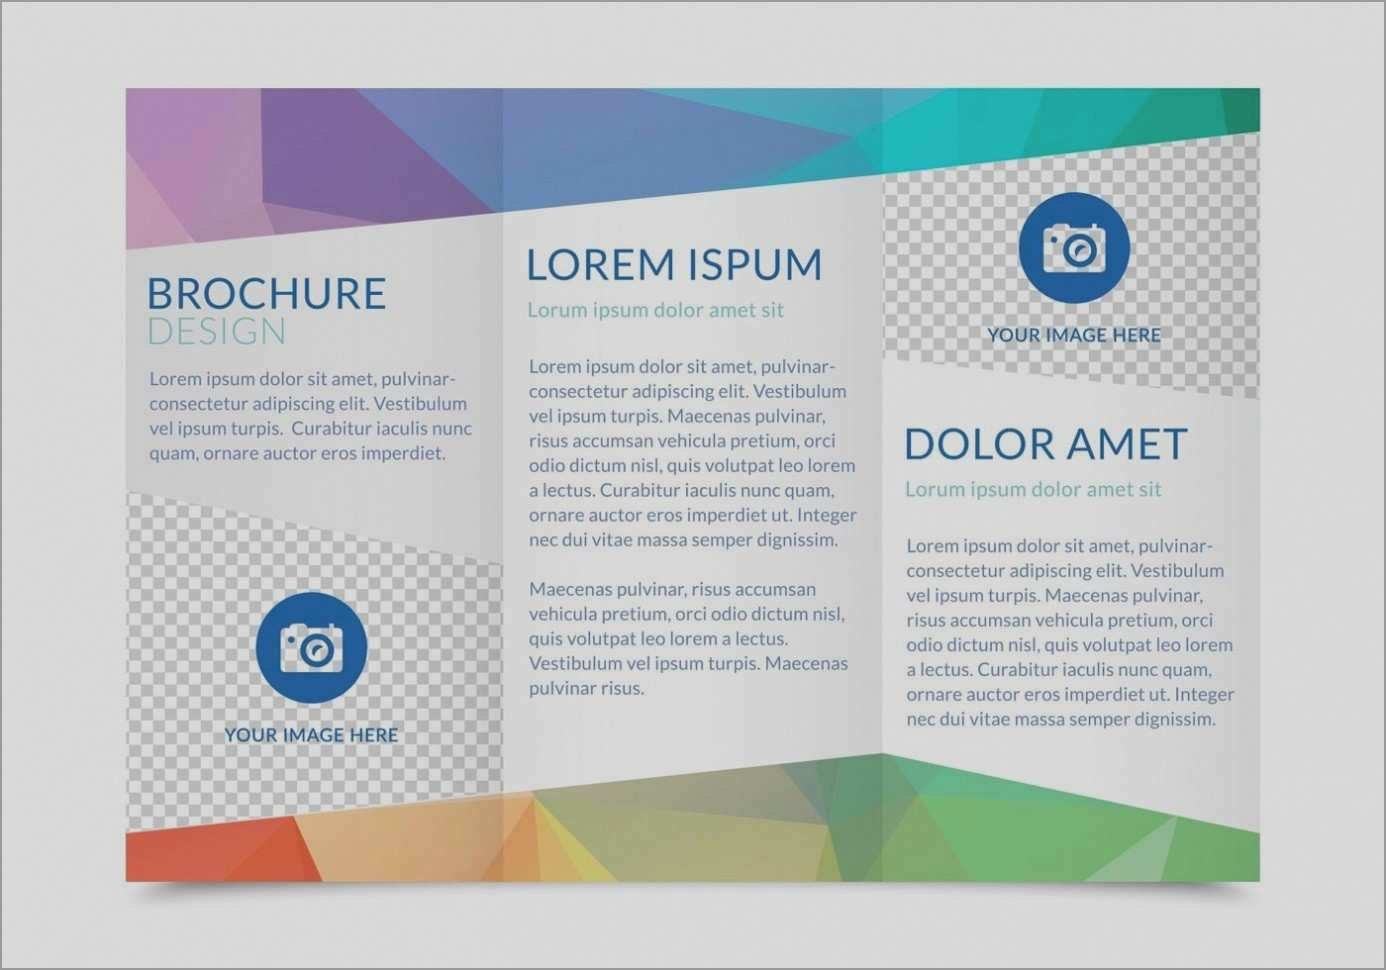 Lovely Free Church Brochure Templates For Microsoft Word  Best Of pertaining to Free Church Brochure Templates For Microsoft Word